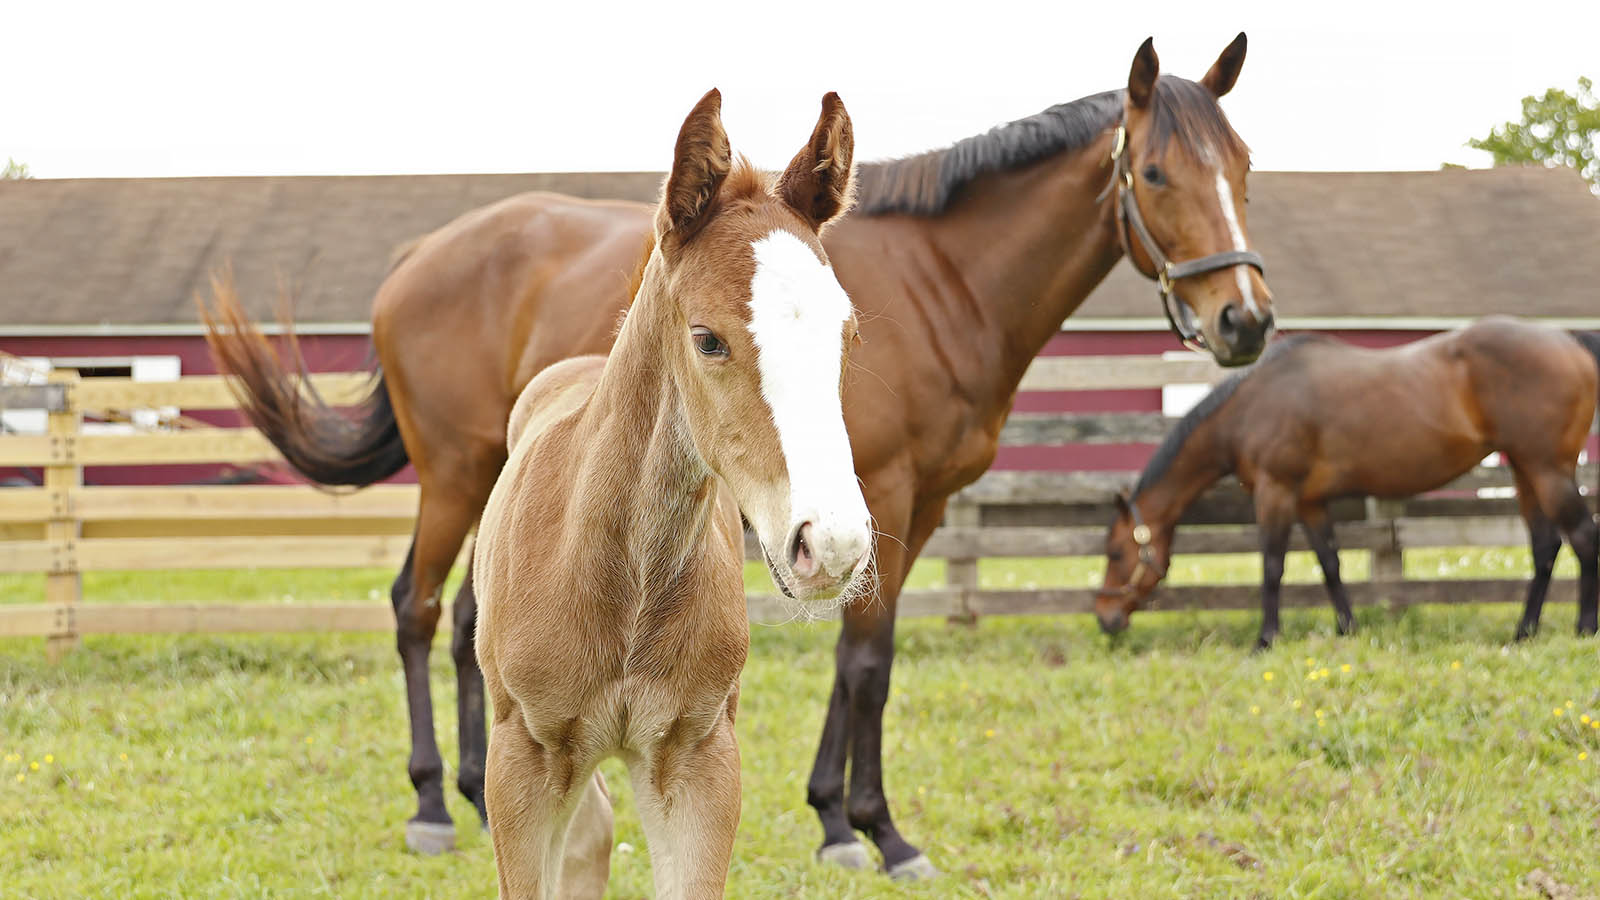 Foal and two horses in field